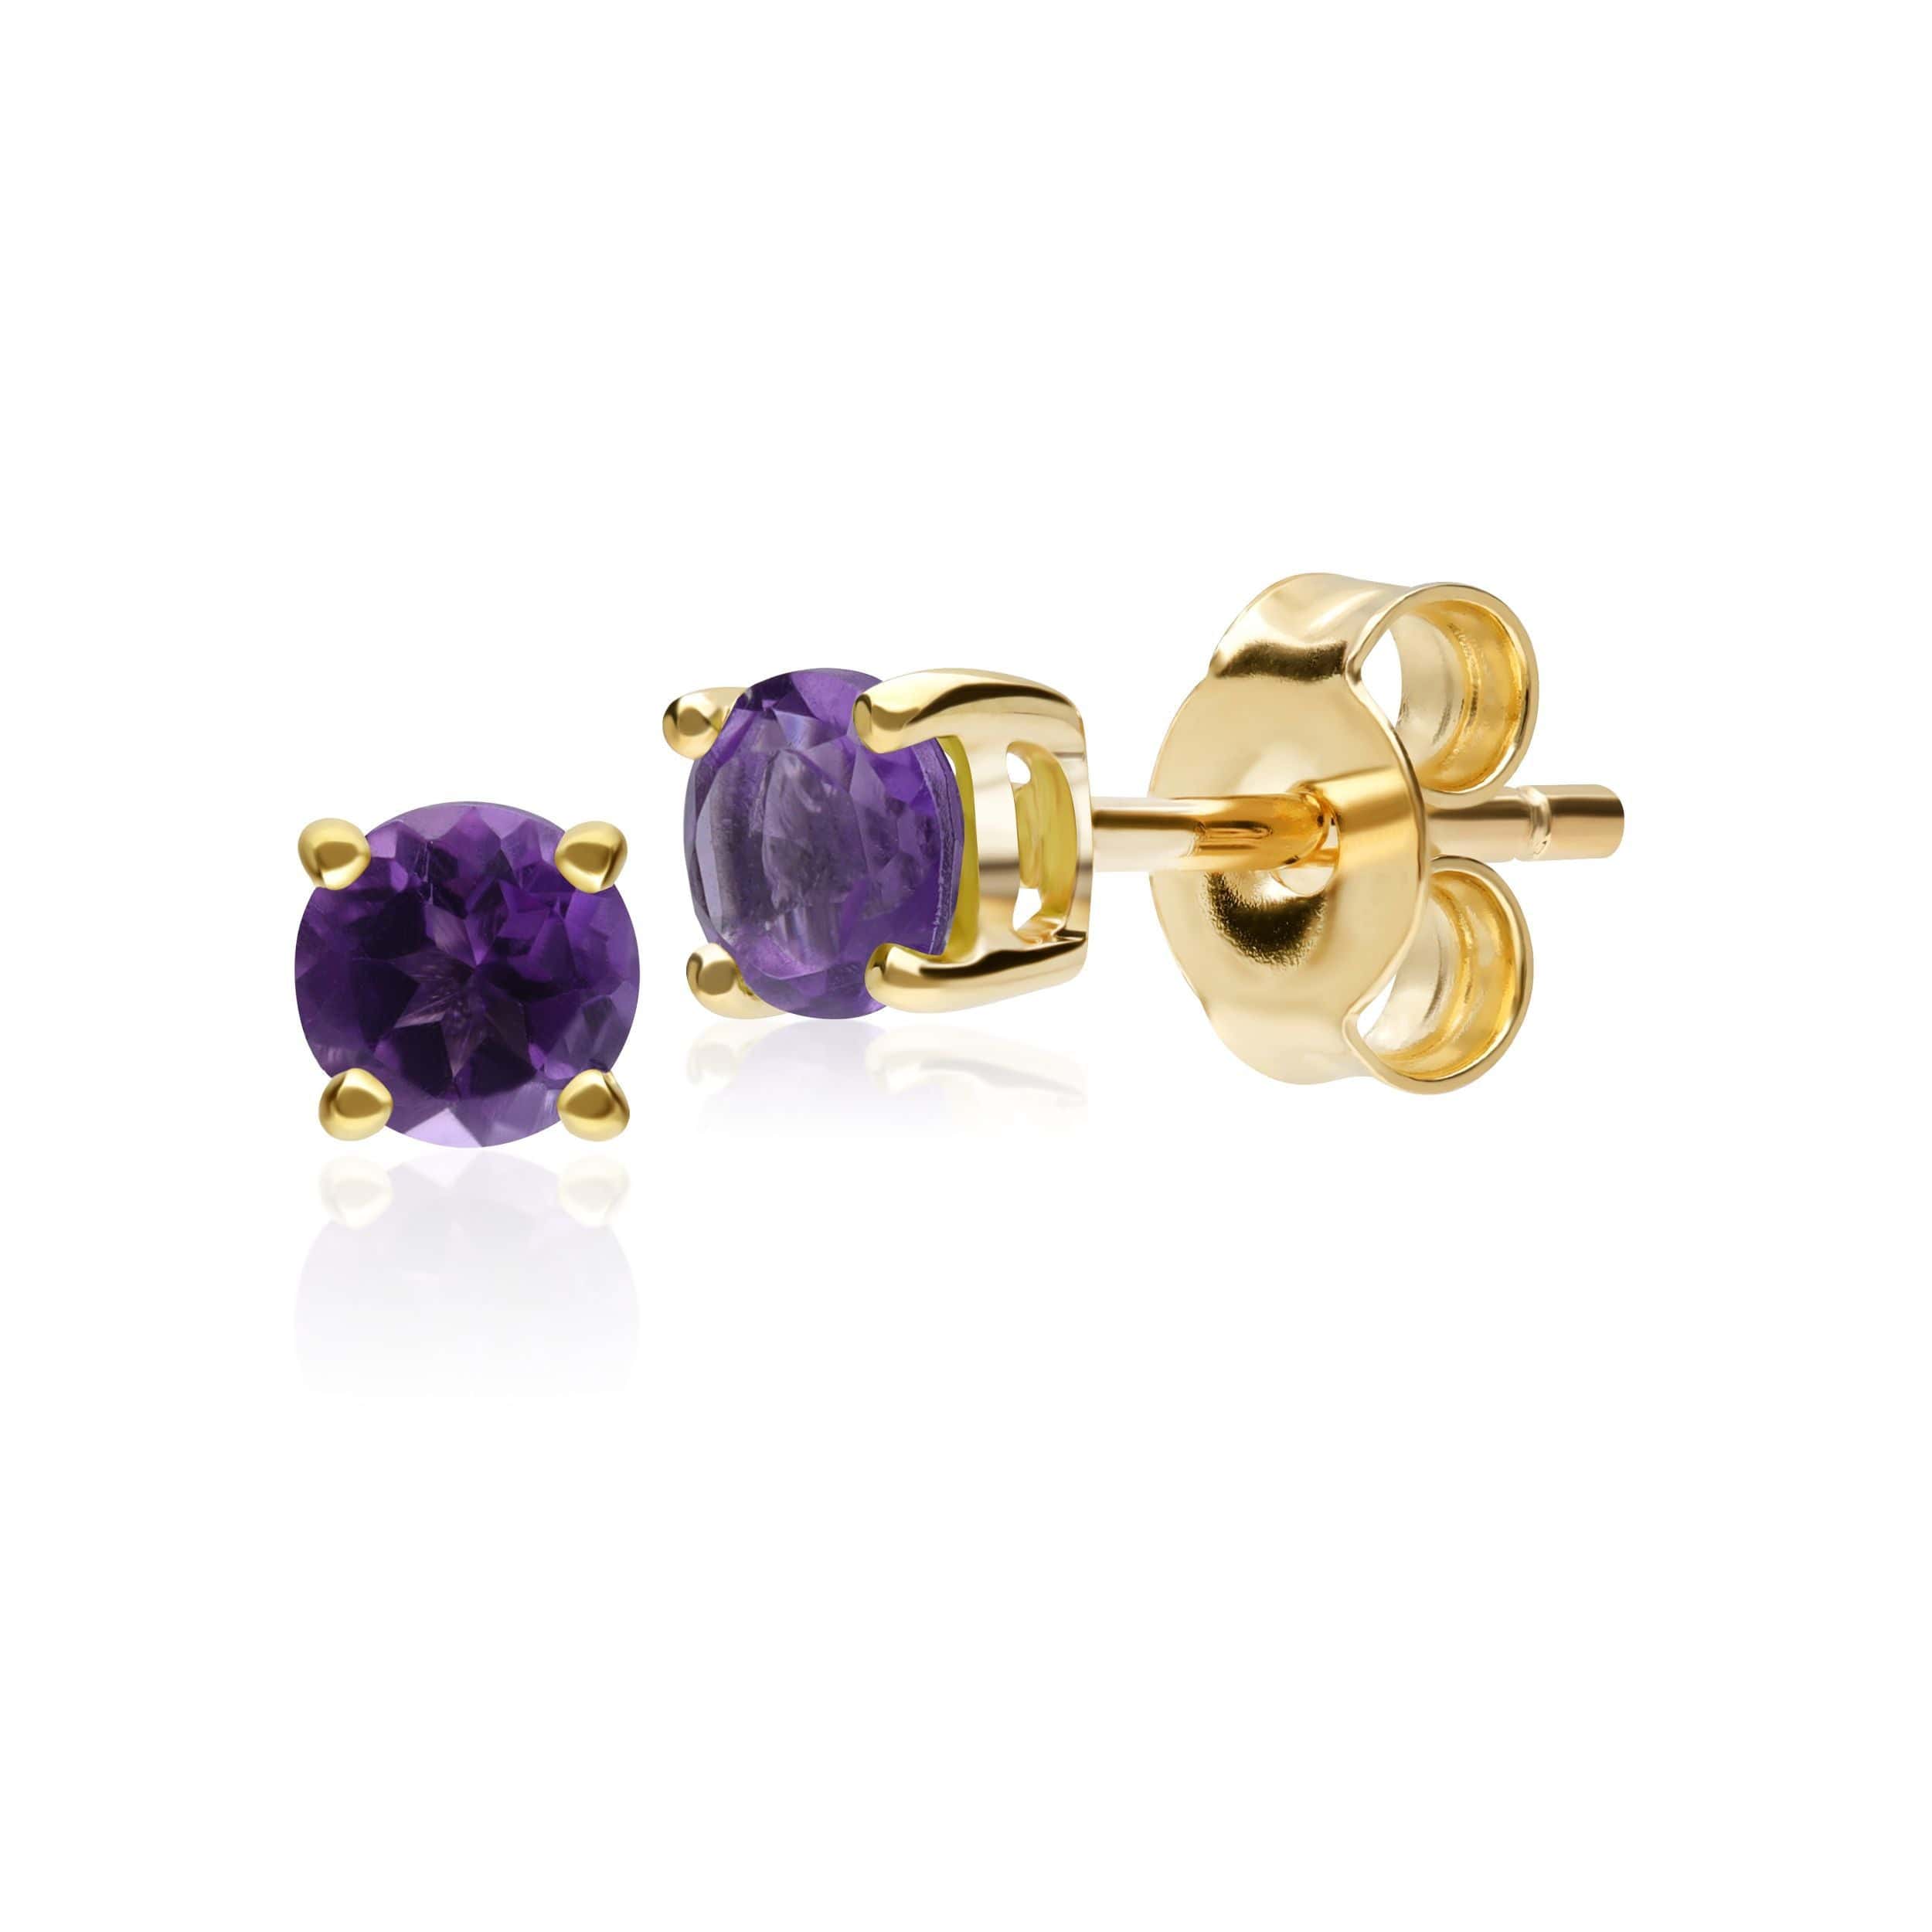 Classic Round Amethyst Stud Earrings in 9ct Yellow Gold - Gemondo